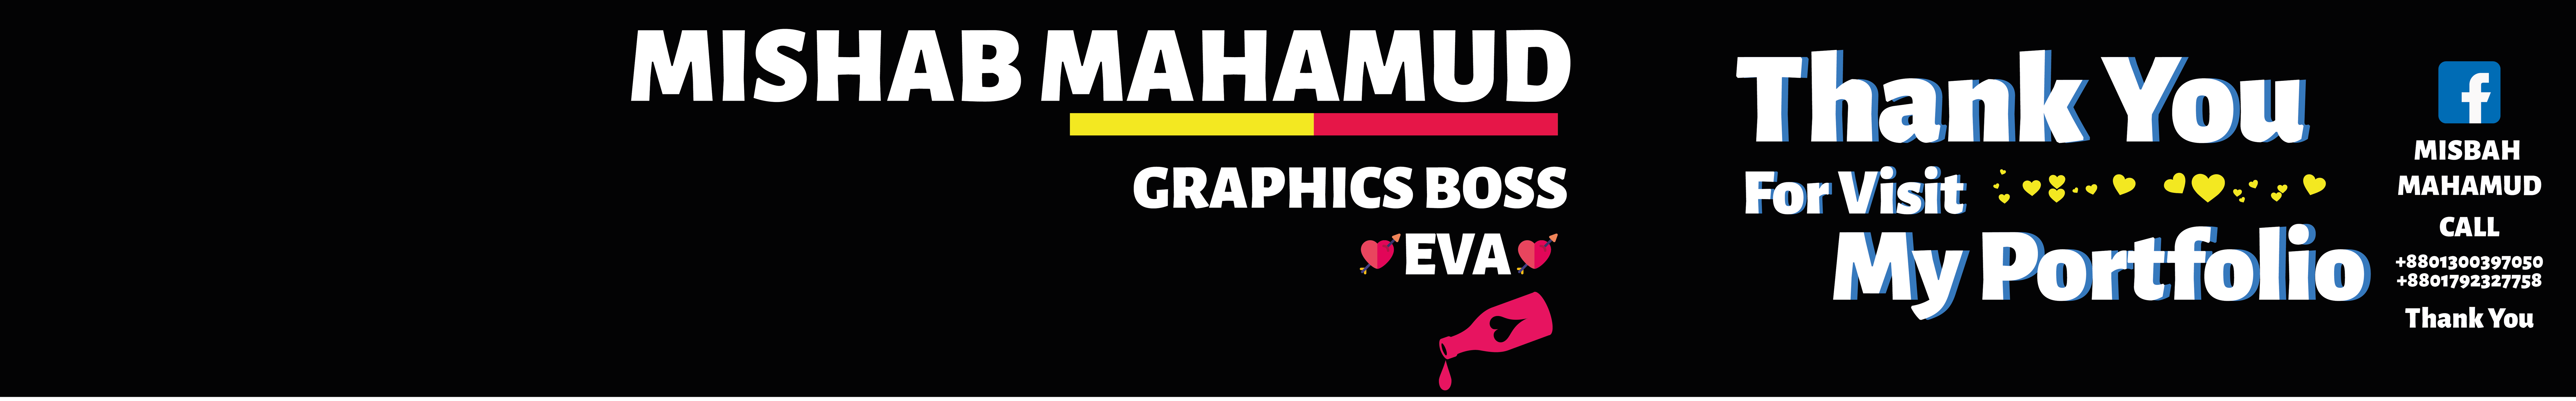 Misbah Mahamud's profile banner